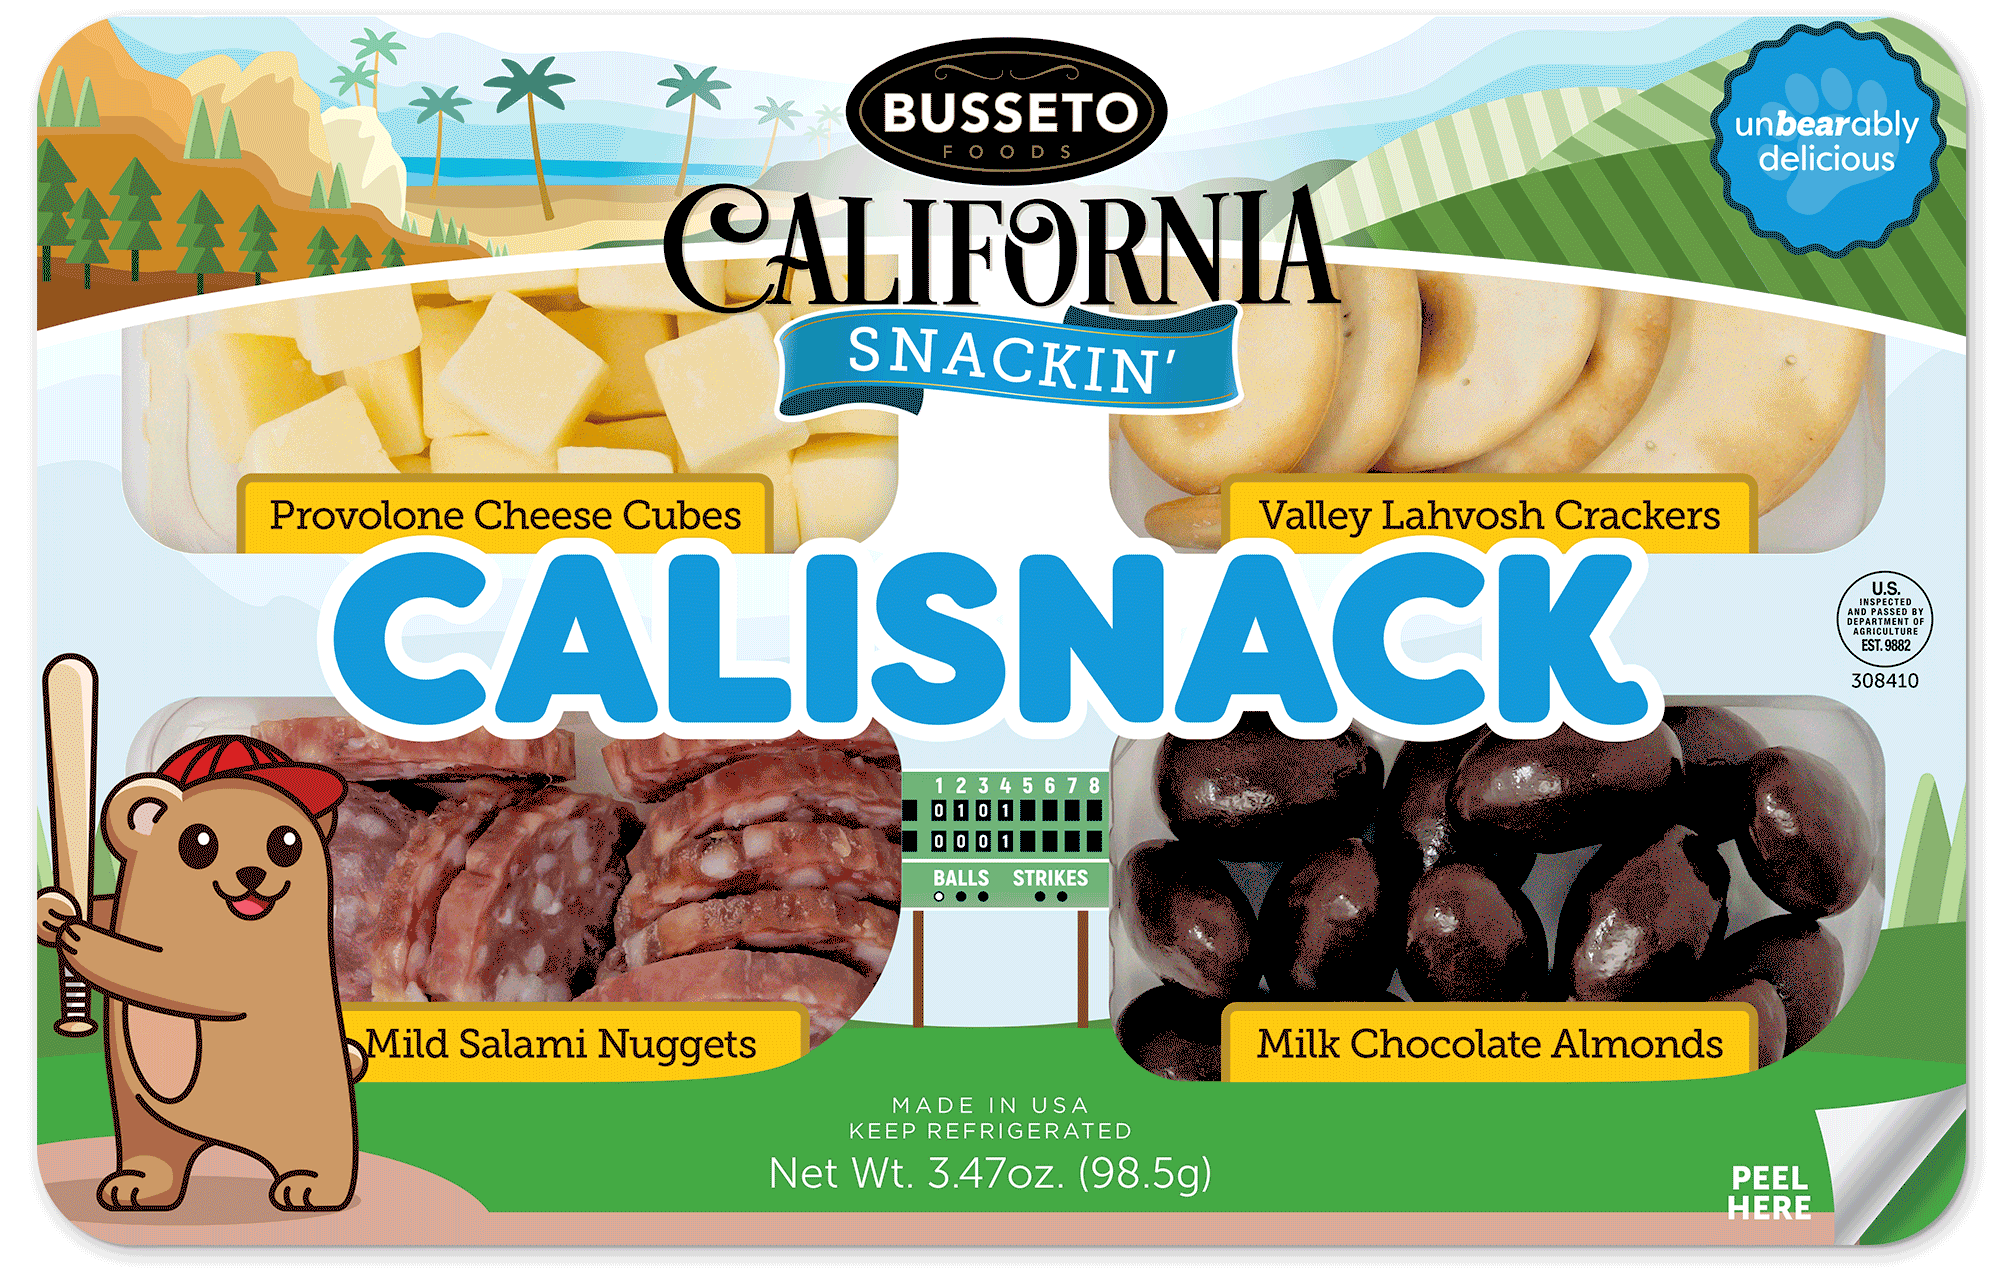 Calisnack Kids by California Snackin' Package Design Octane Advertising Design